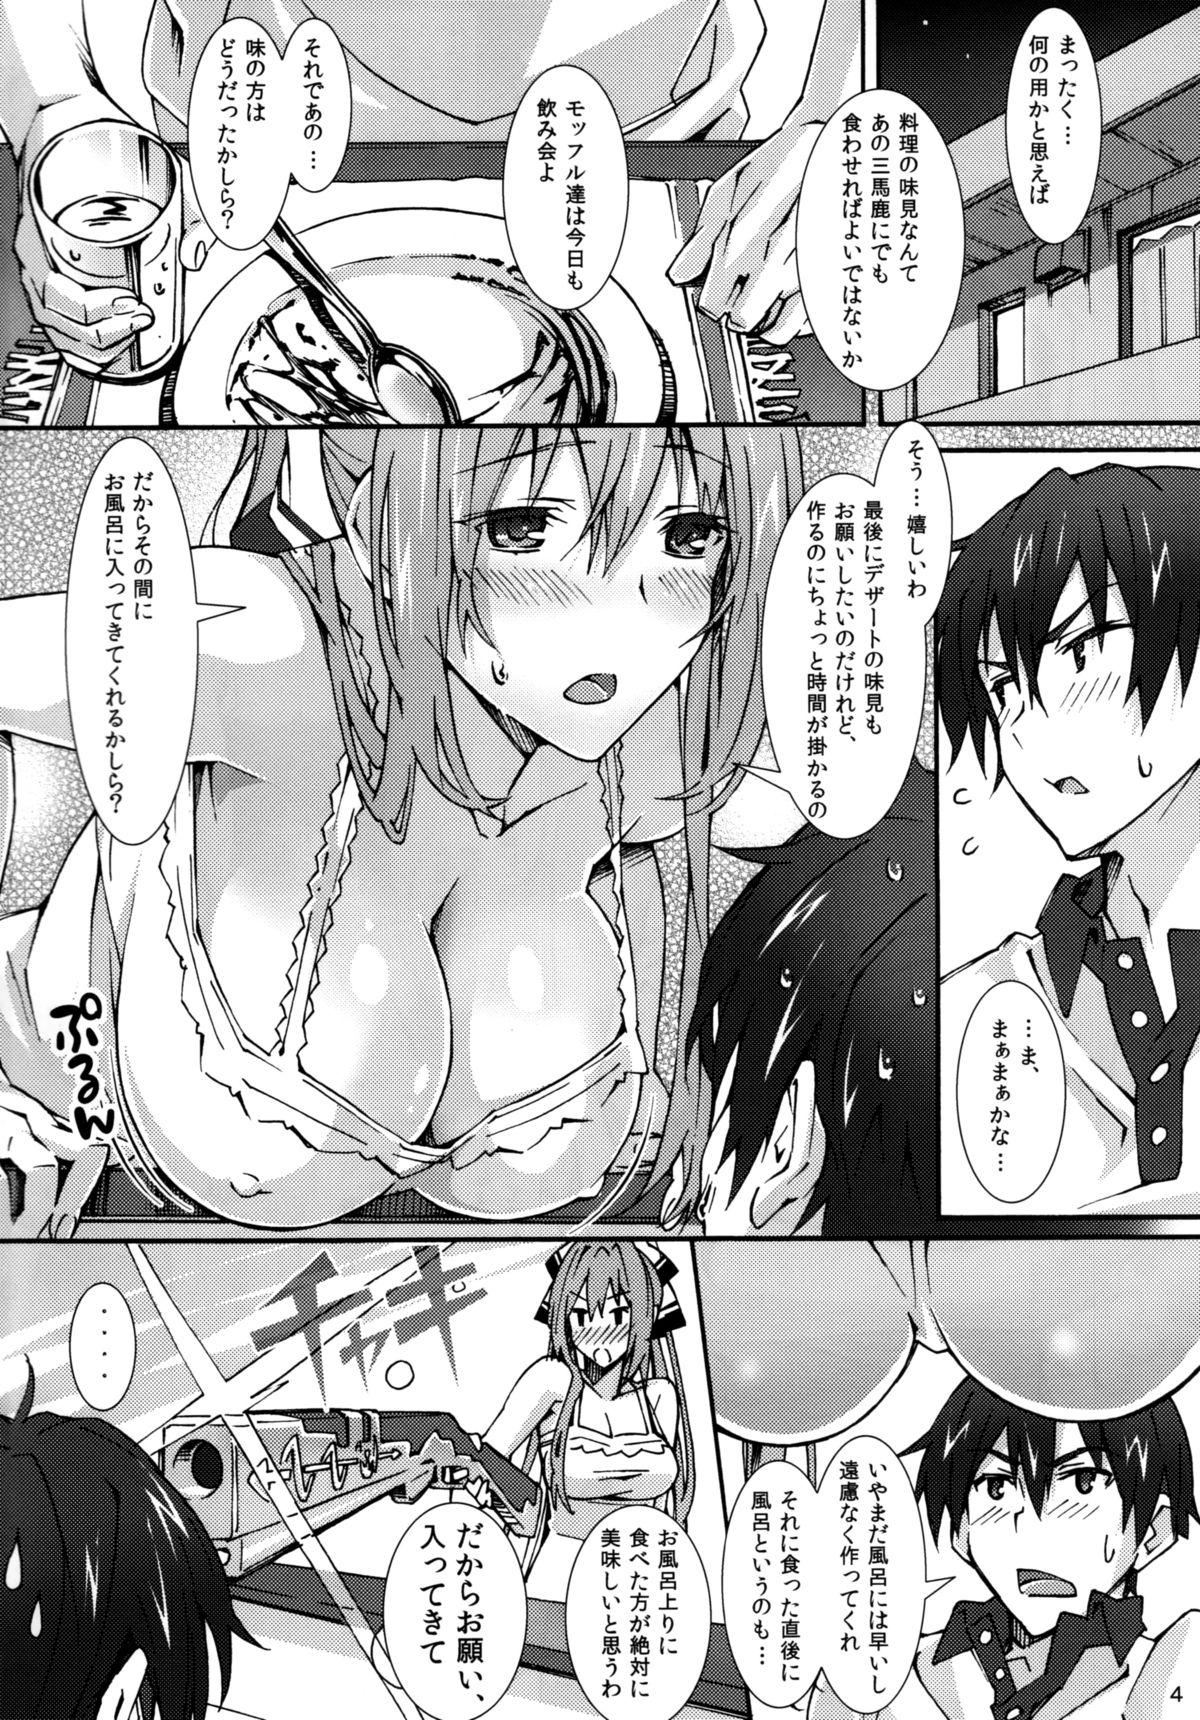 Hot Teen Real Intention - Amagi brilliant park Foreskin - Page 4